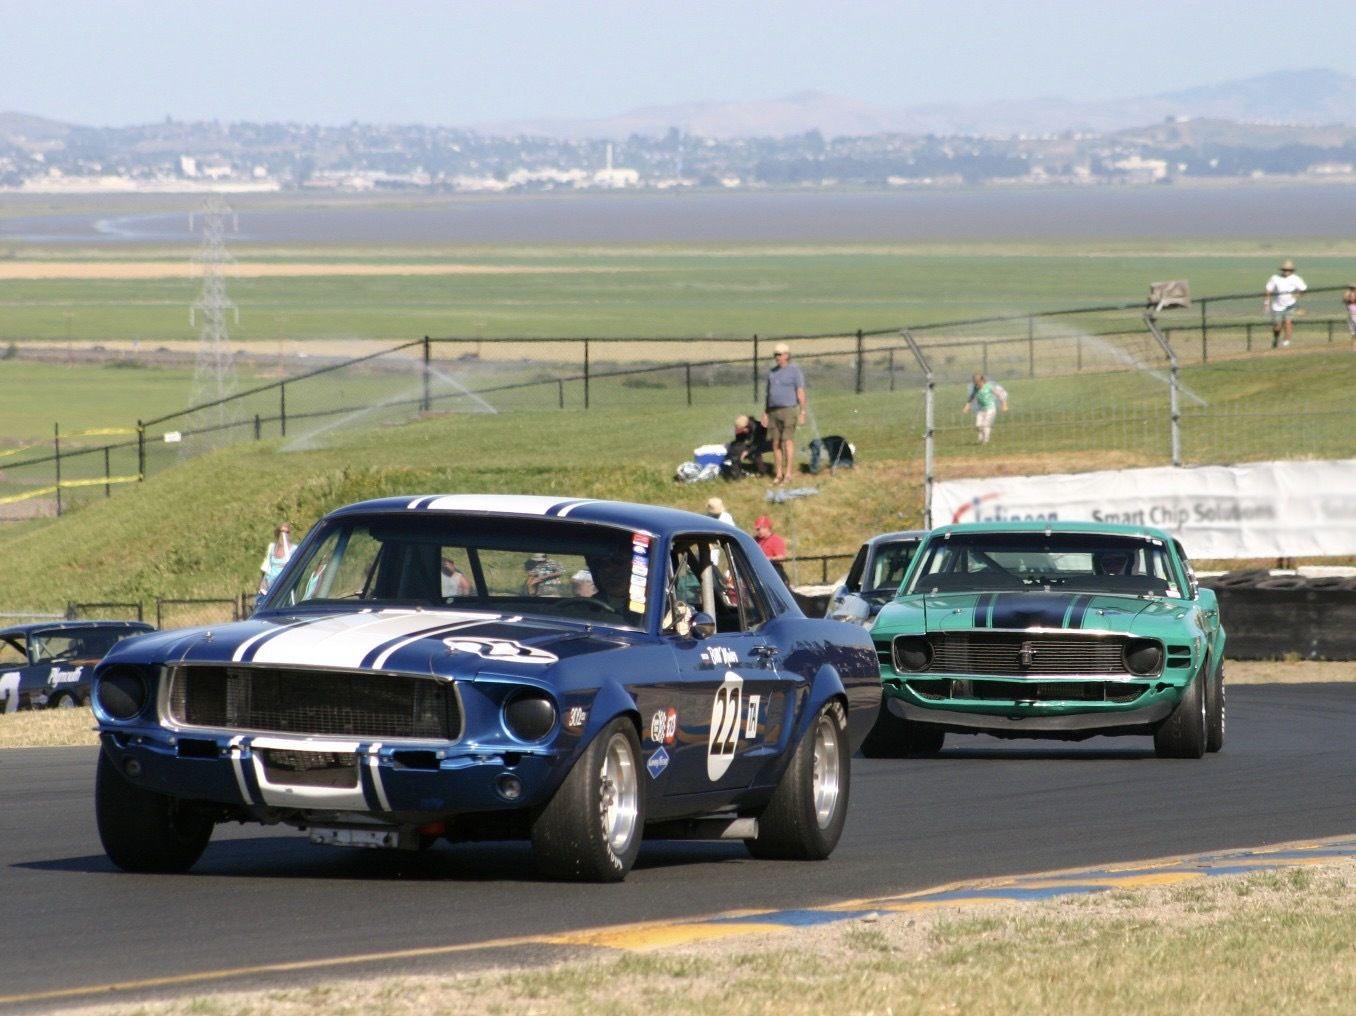 Historic Trans Am Series Added to Toyota/Save Mart 350 Weekend in